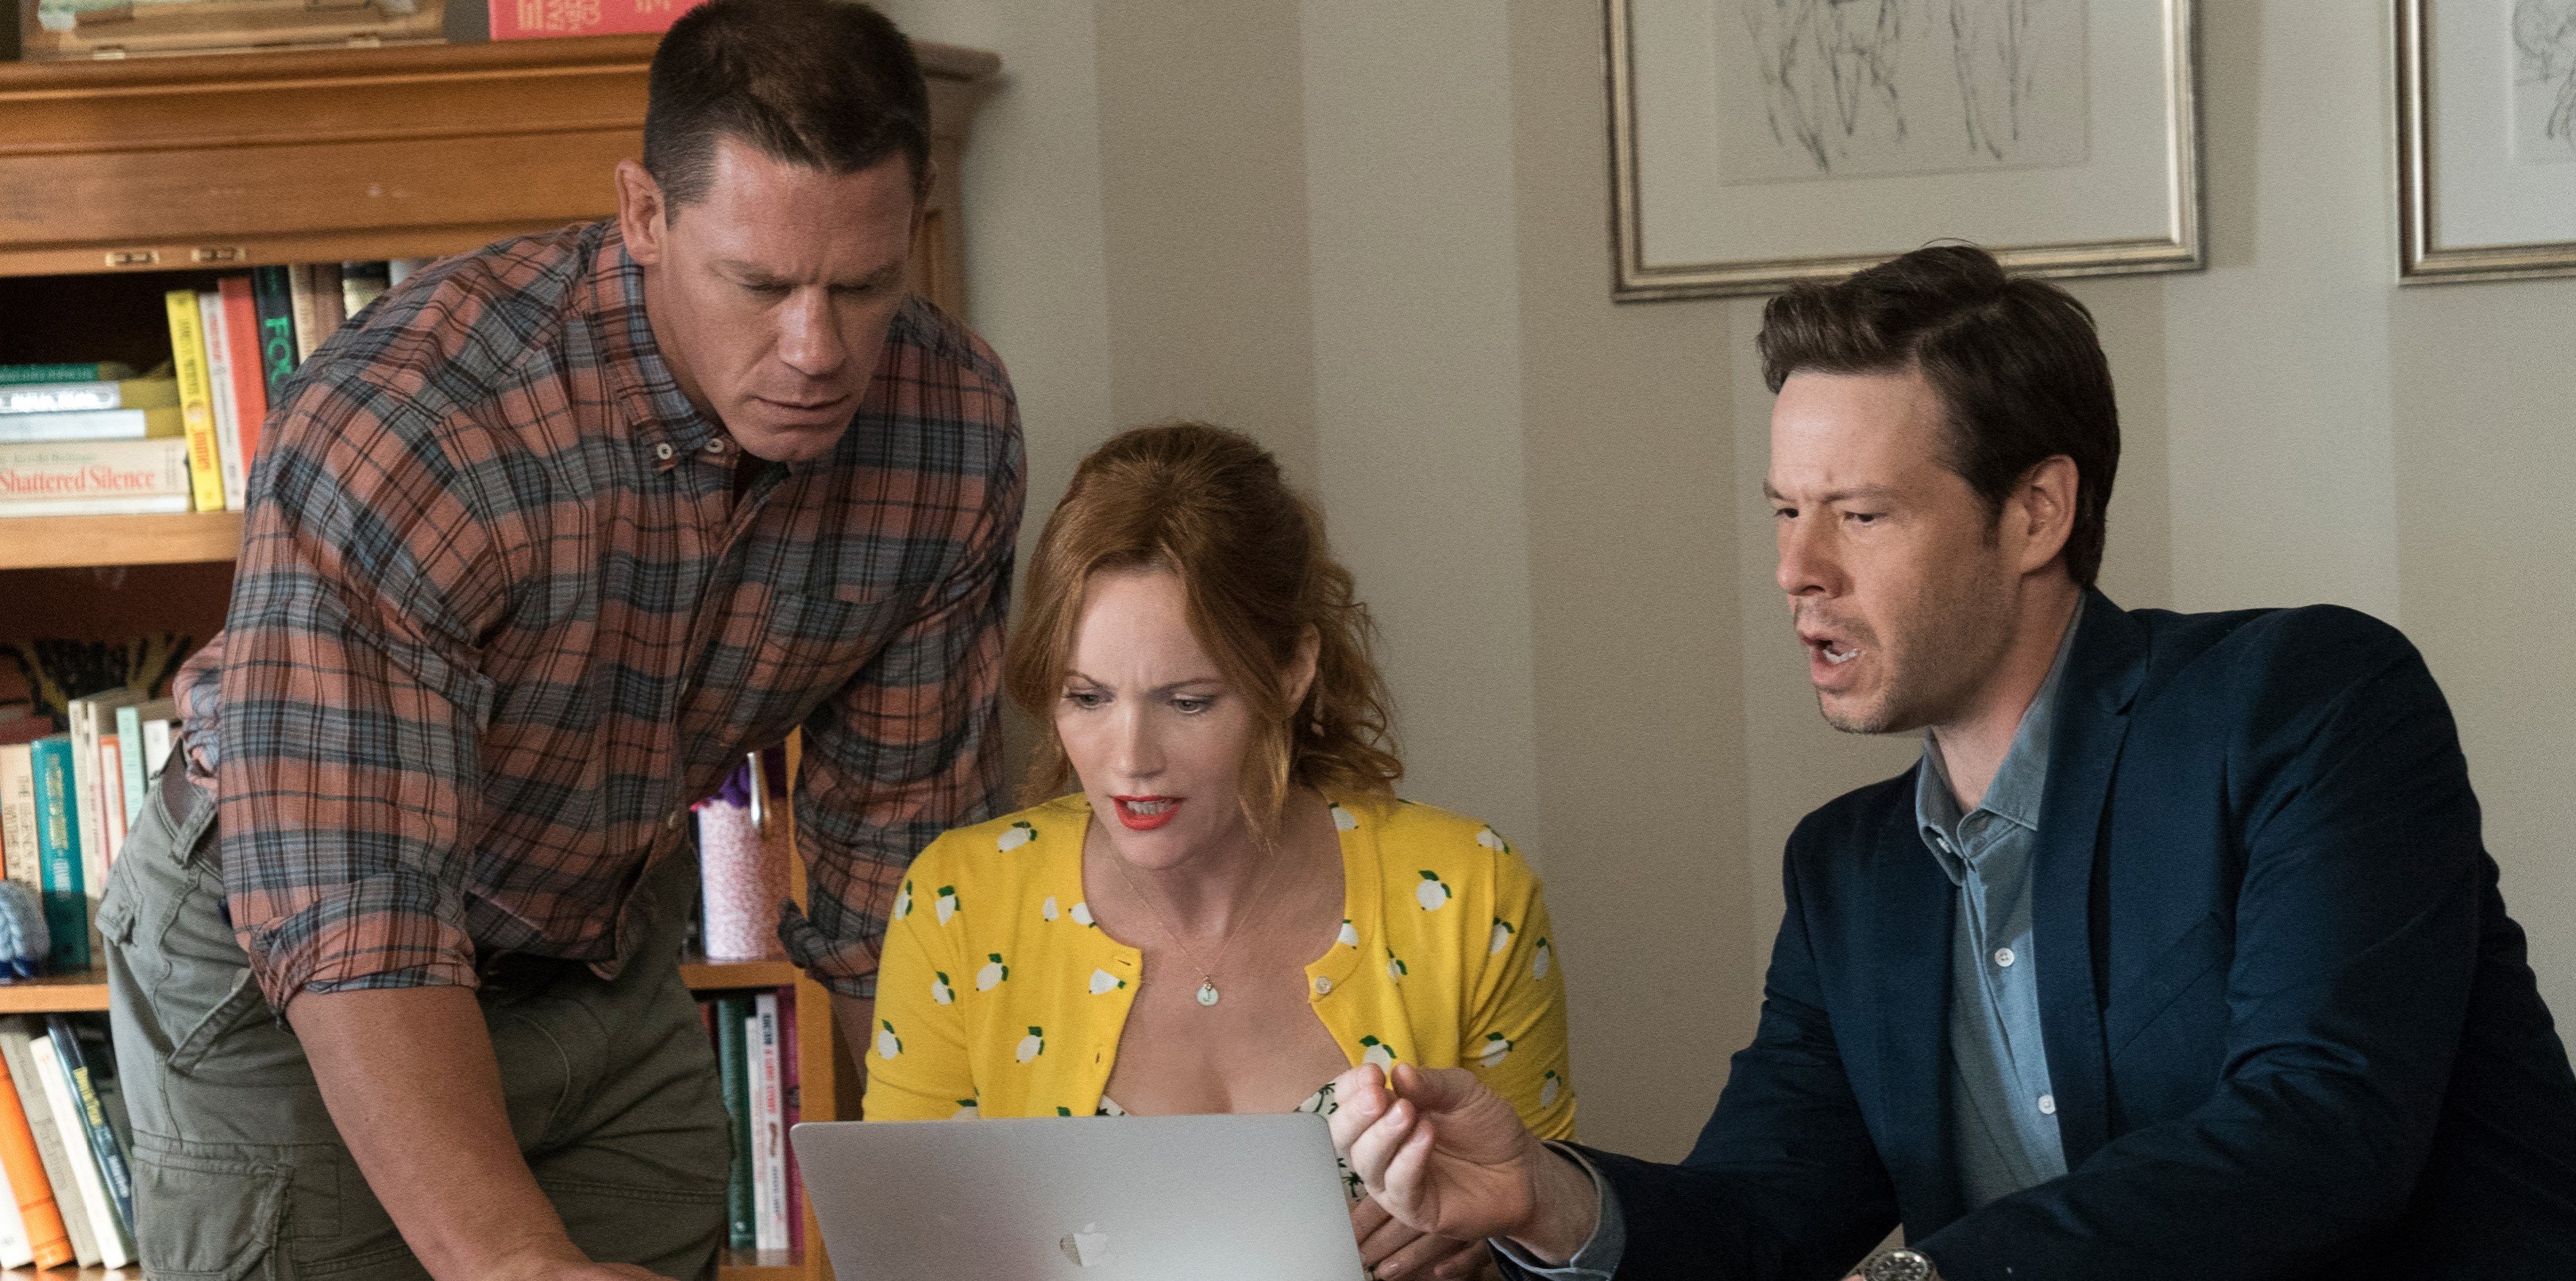 Watch the Launch Trailer for Blockers - coming soon in 2018